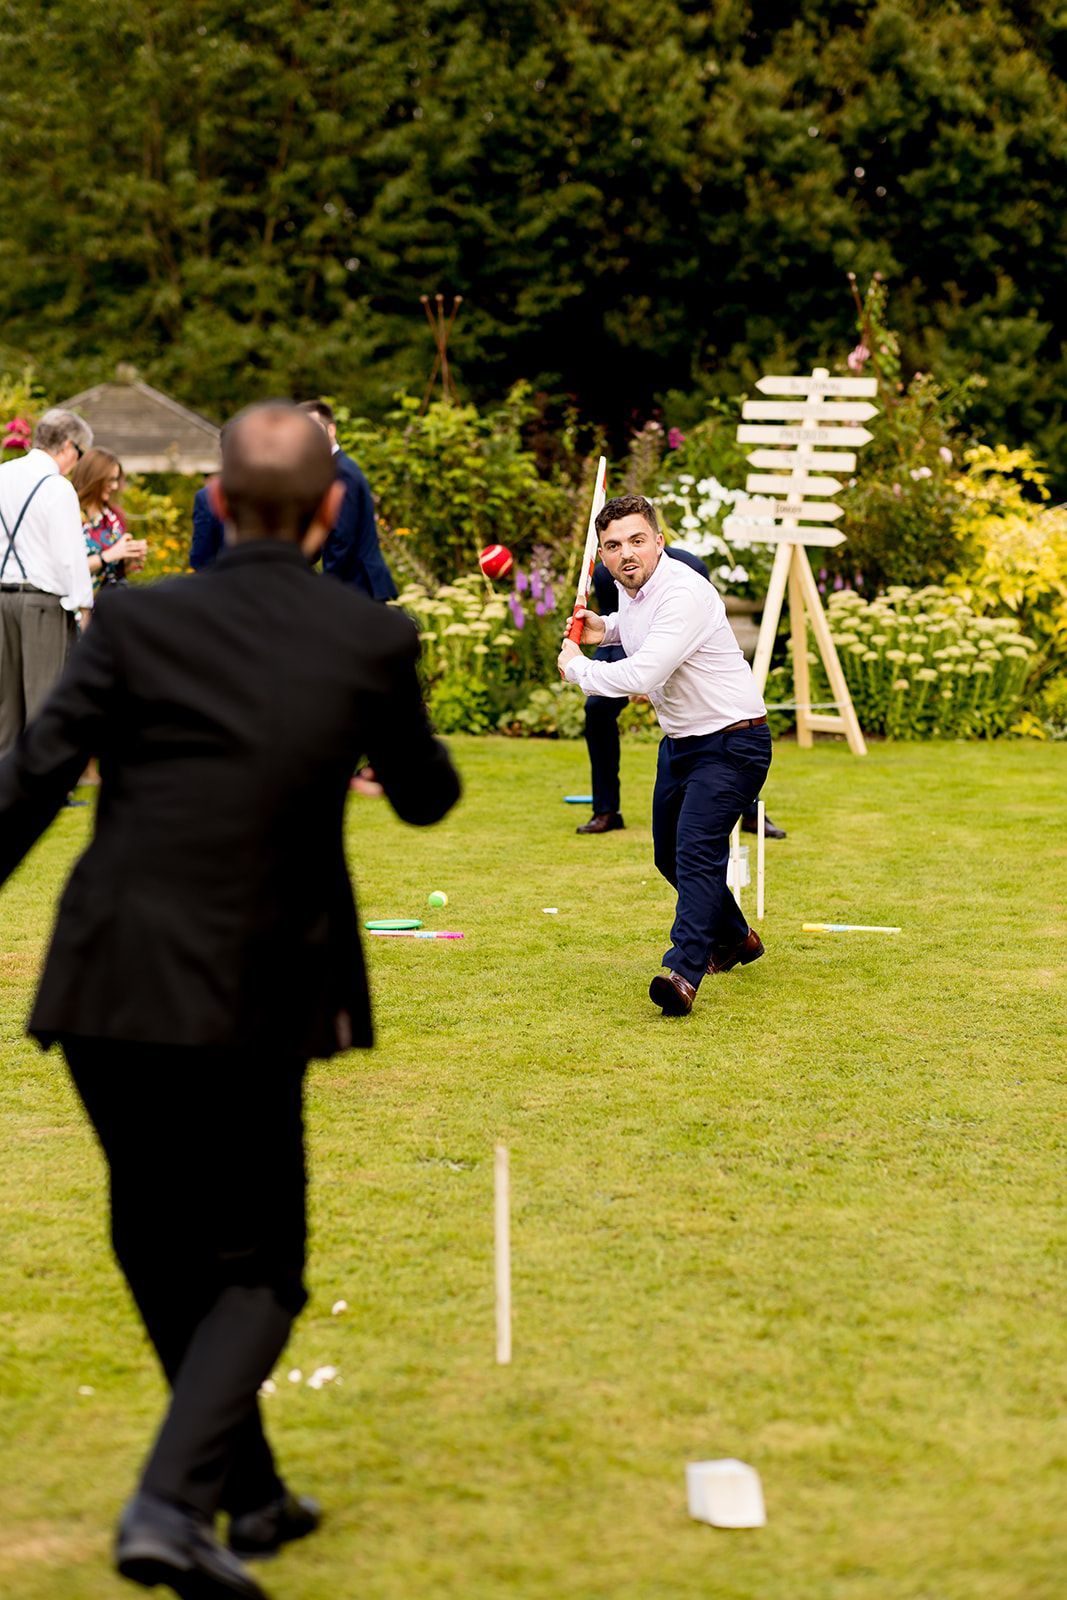 Cricket on the lawn - with a soft ball!